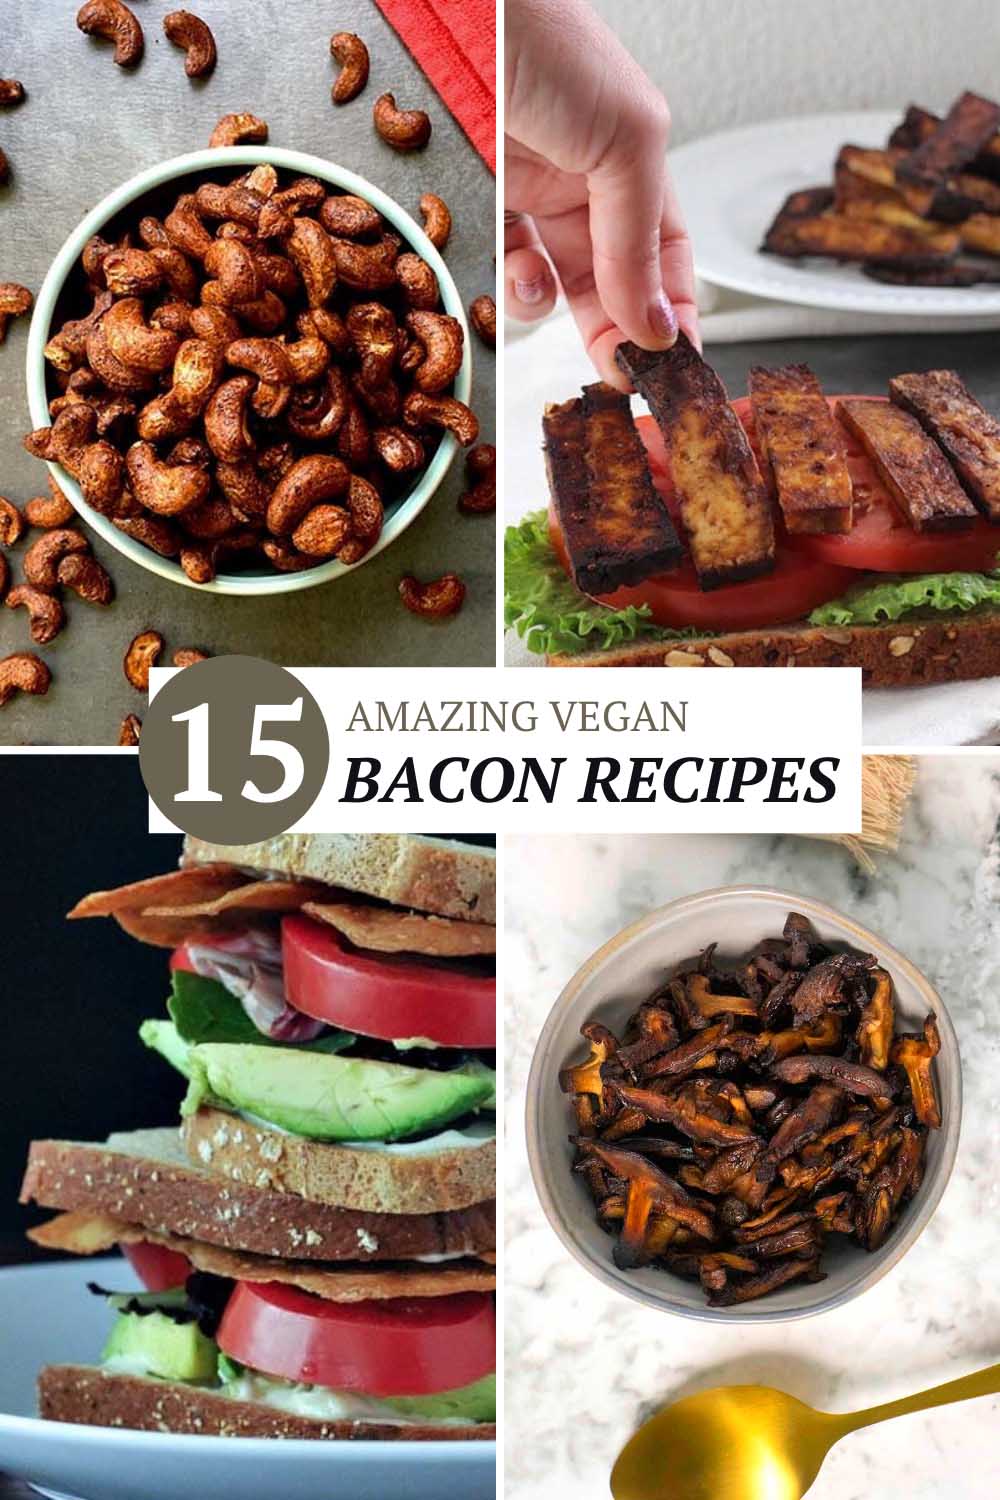 image collage showing vegan bacon bits, tofu bacon, rice paper bacon, and mushroom bacon, text reads, "15 Amazing Vegan Bacon Recipes"